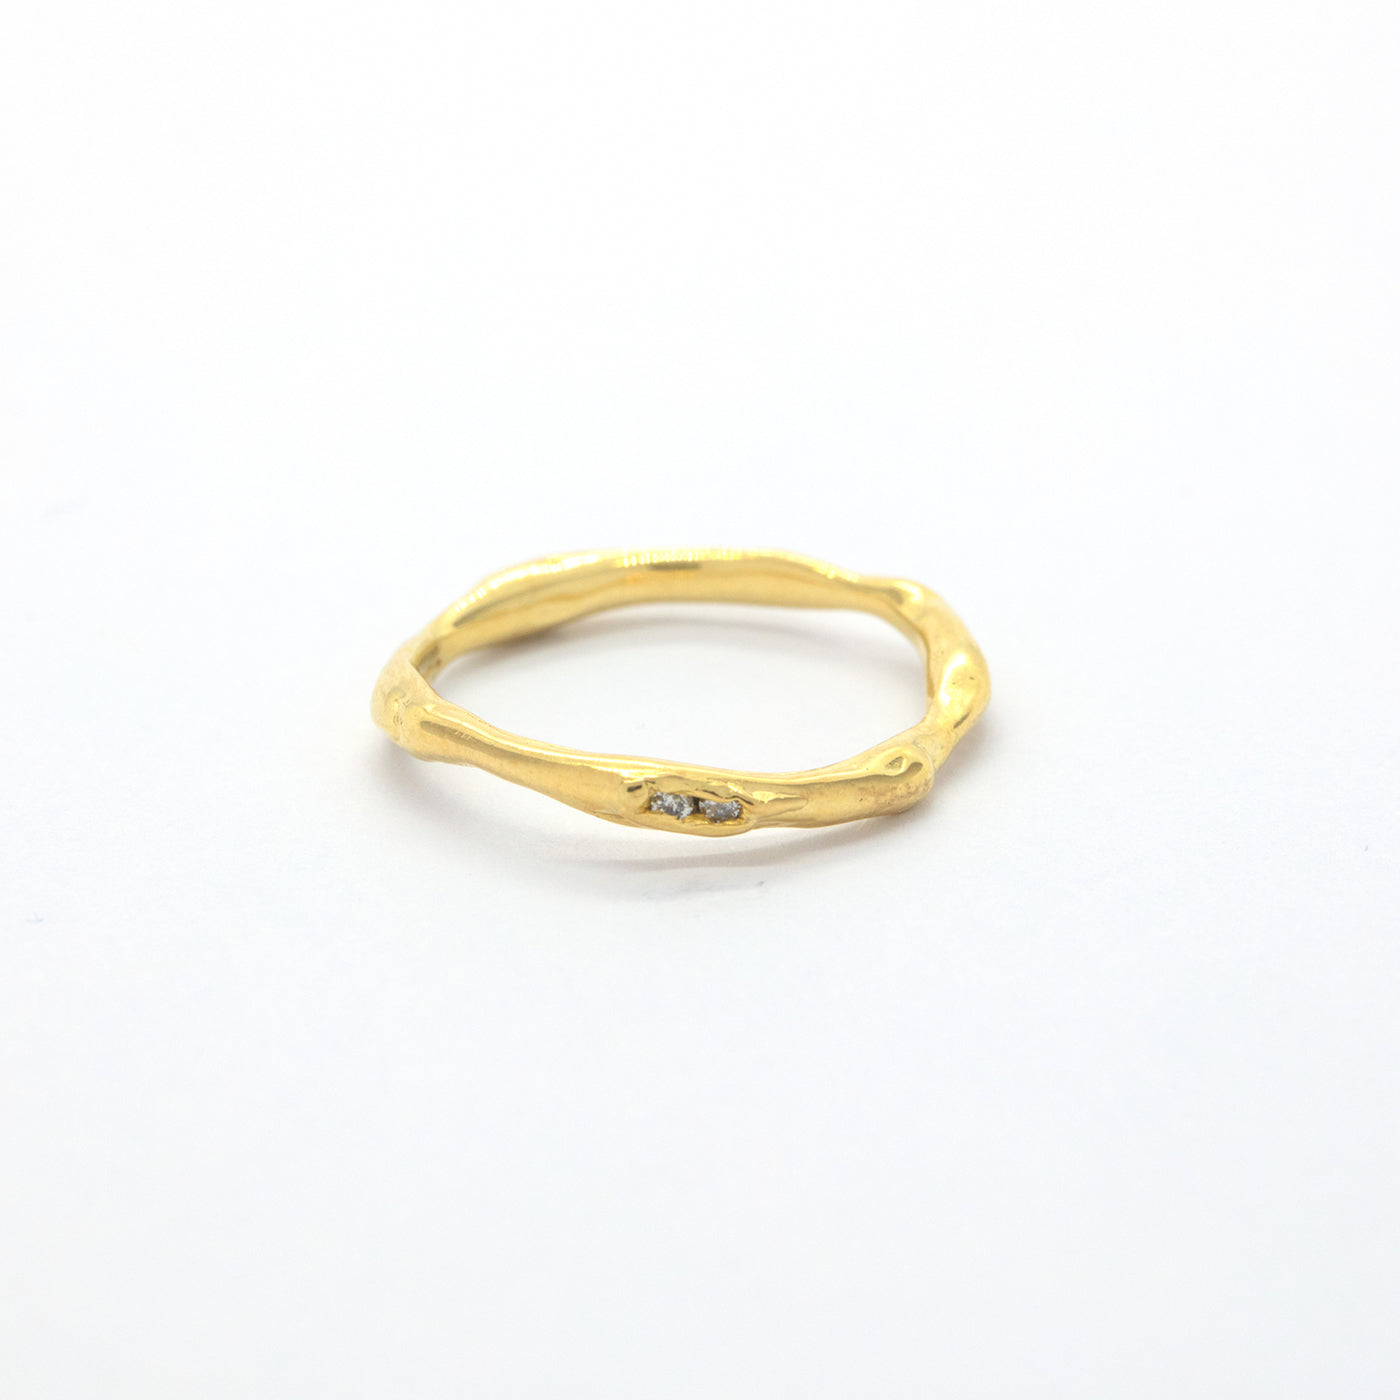 Ring Erato Wedding Band for Her 14ct or 18ct yellow gold 3 champagne diamonds 0.06ct front product view innan jewellery independent atelier berlin